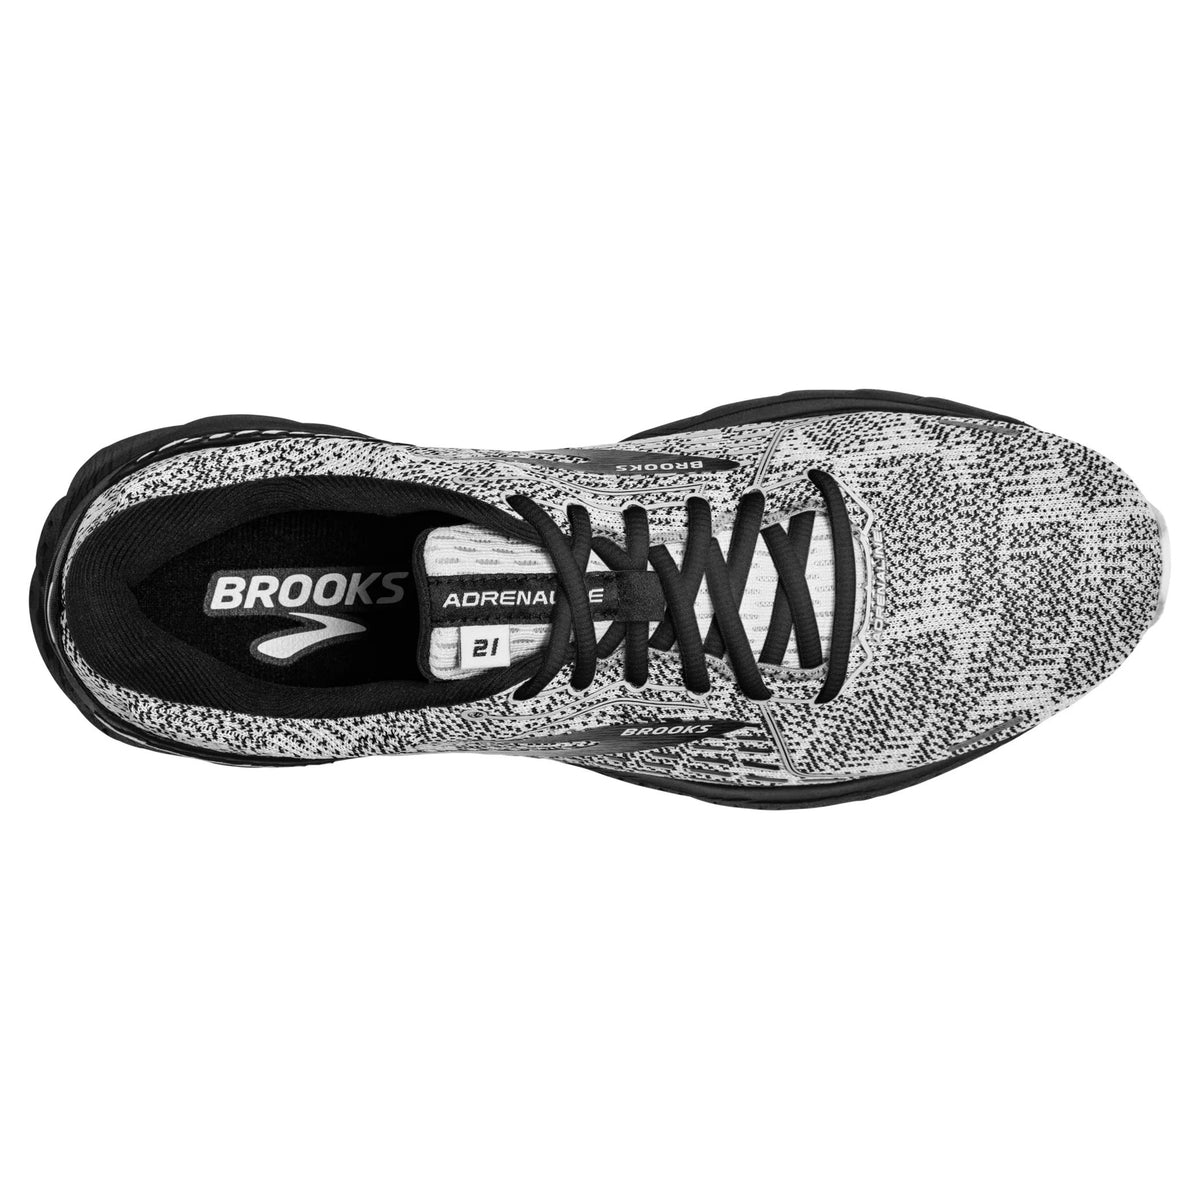 Top view of a single Brooks Adrenaline GTS 21 Blackened White/Grey - Mens stability running shoe.